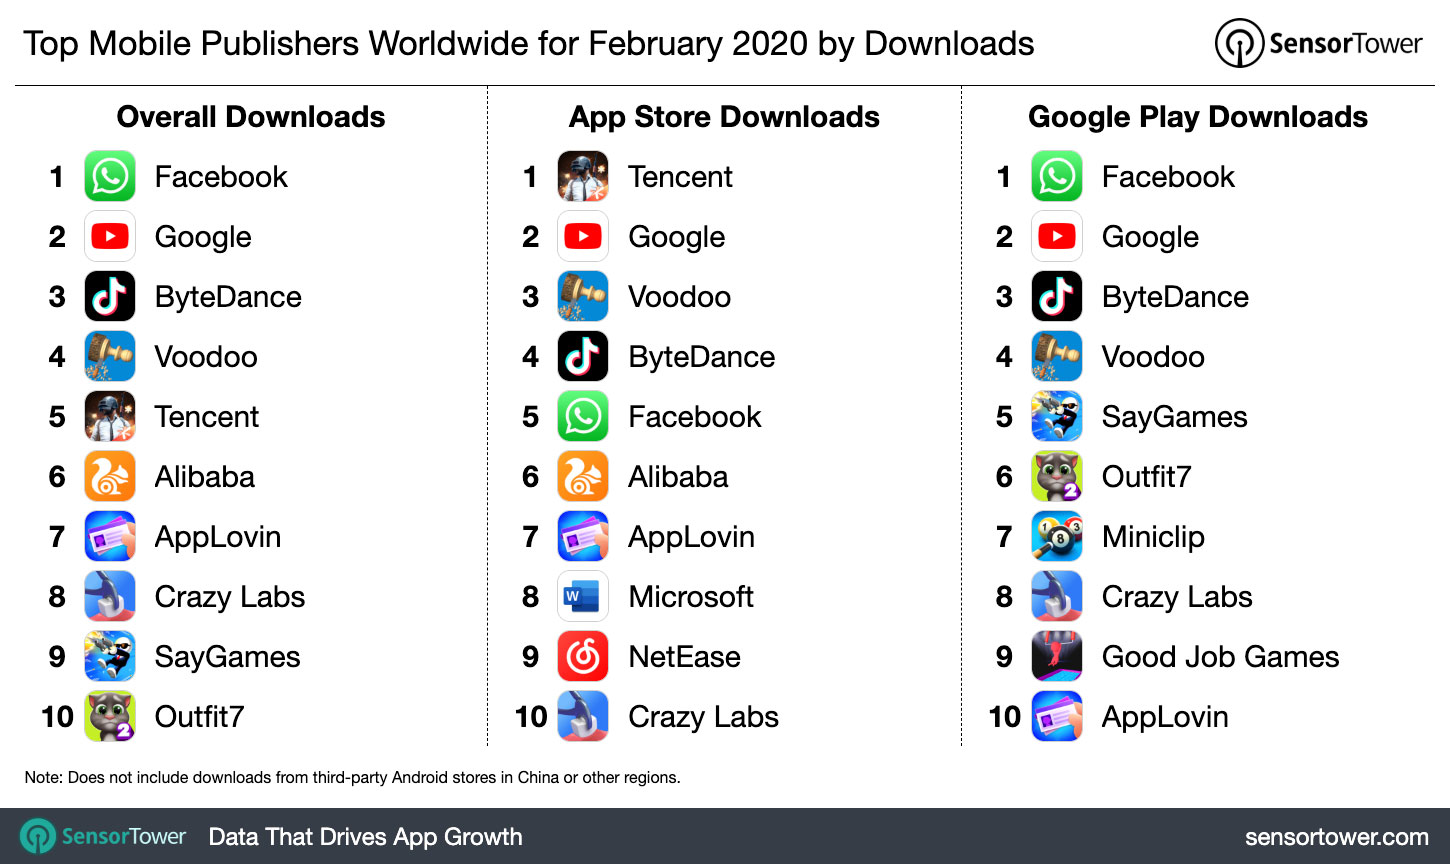 Top Mobile Publishers Worldwide for February 2020 by Downloads